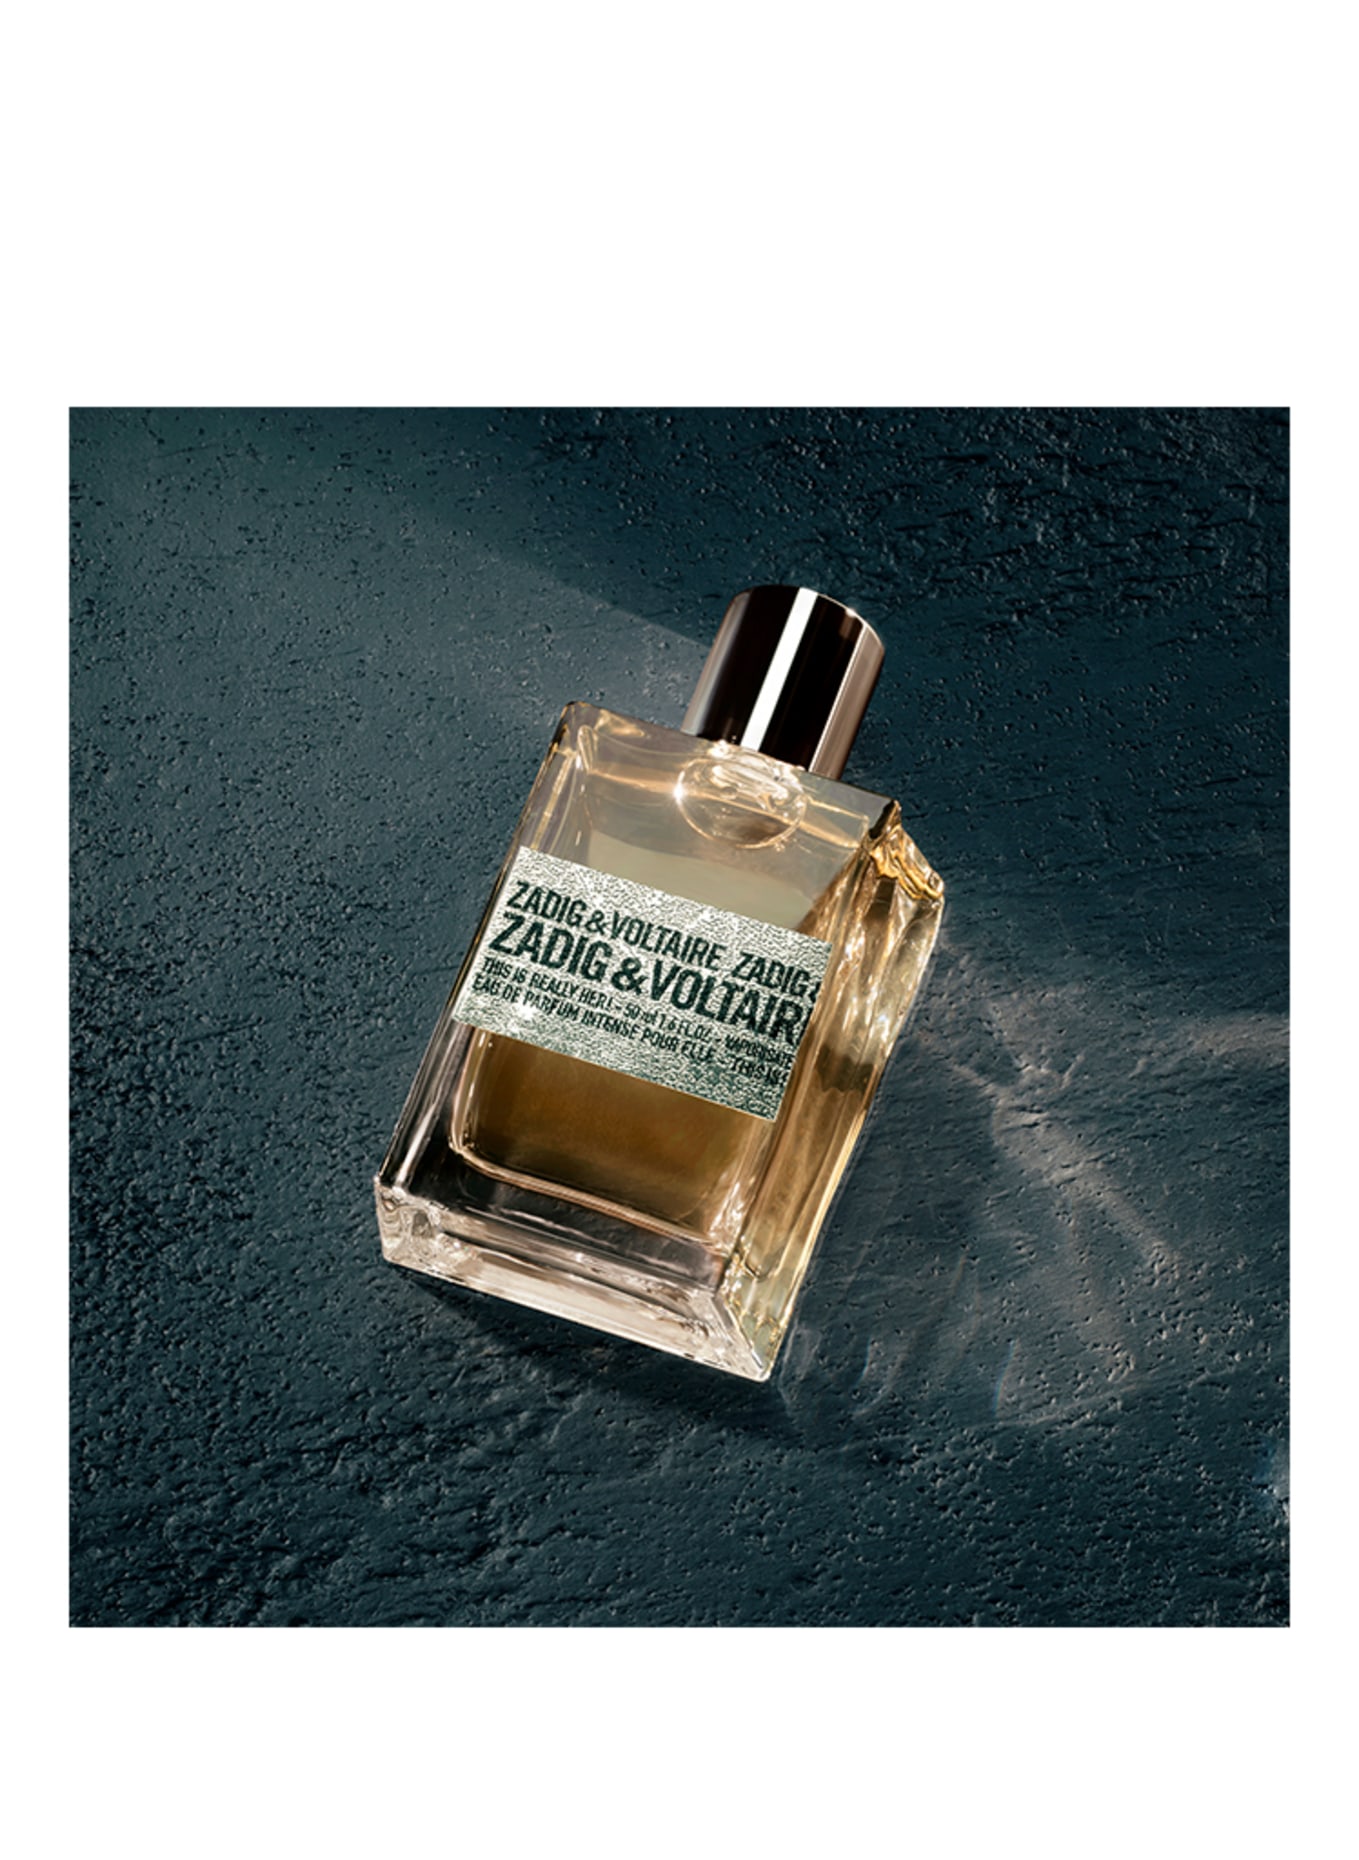 ZADIG & VOLTAIRE Fragrances THIS IS REALLY HER! (Obrazek 3)